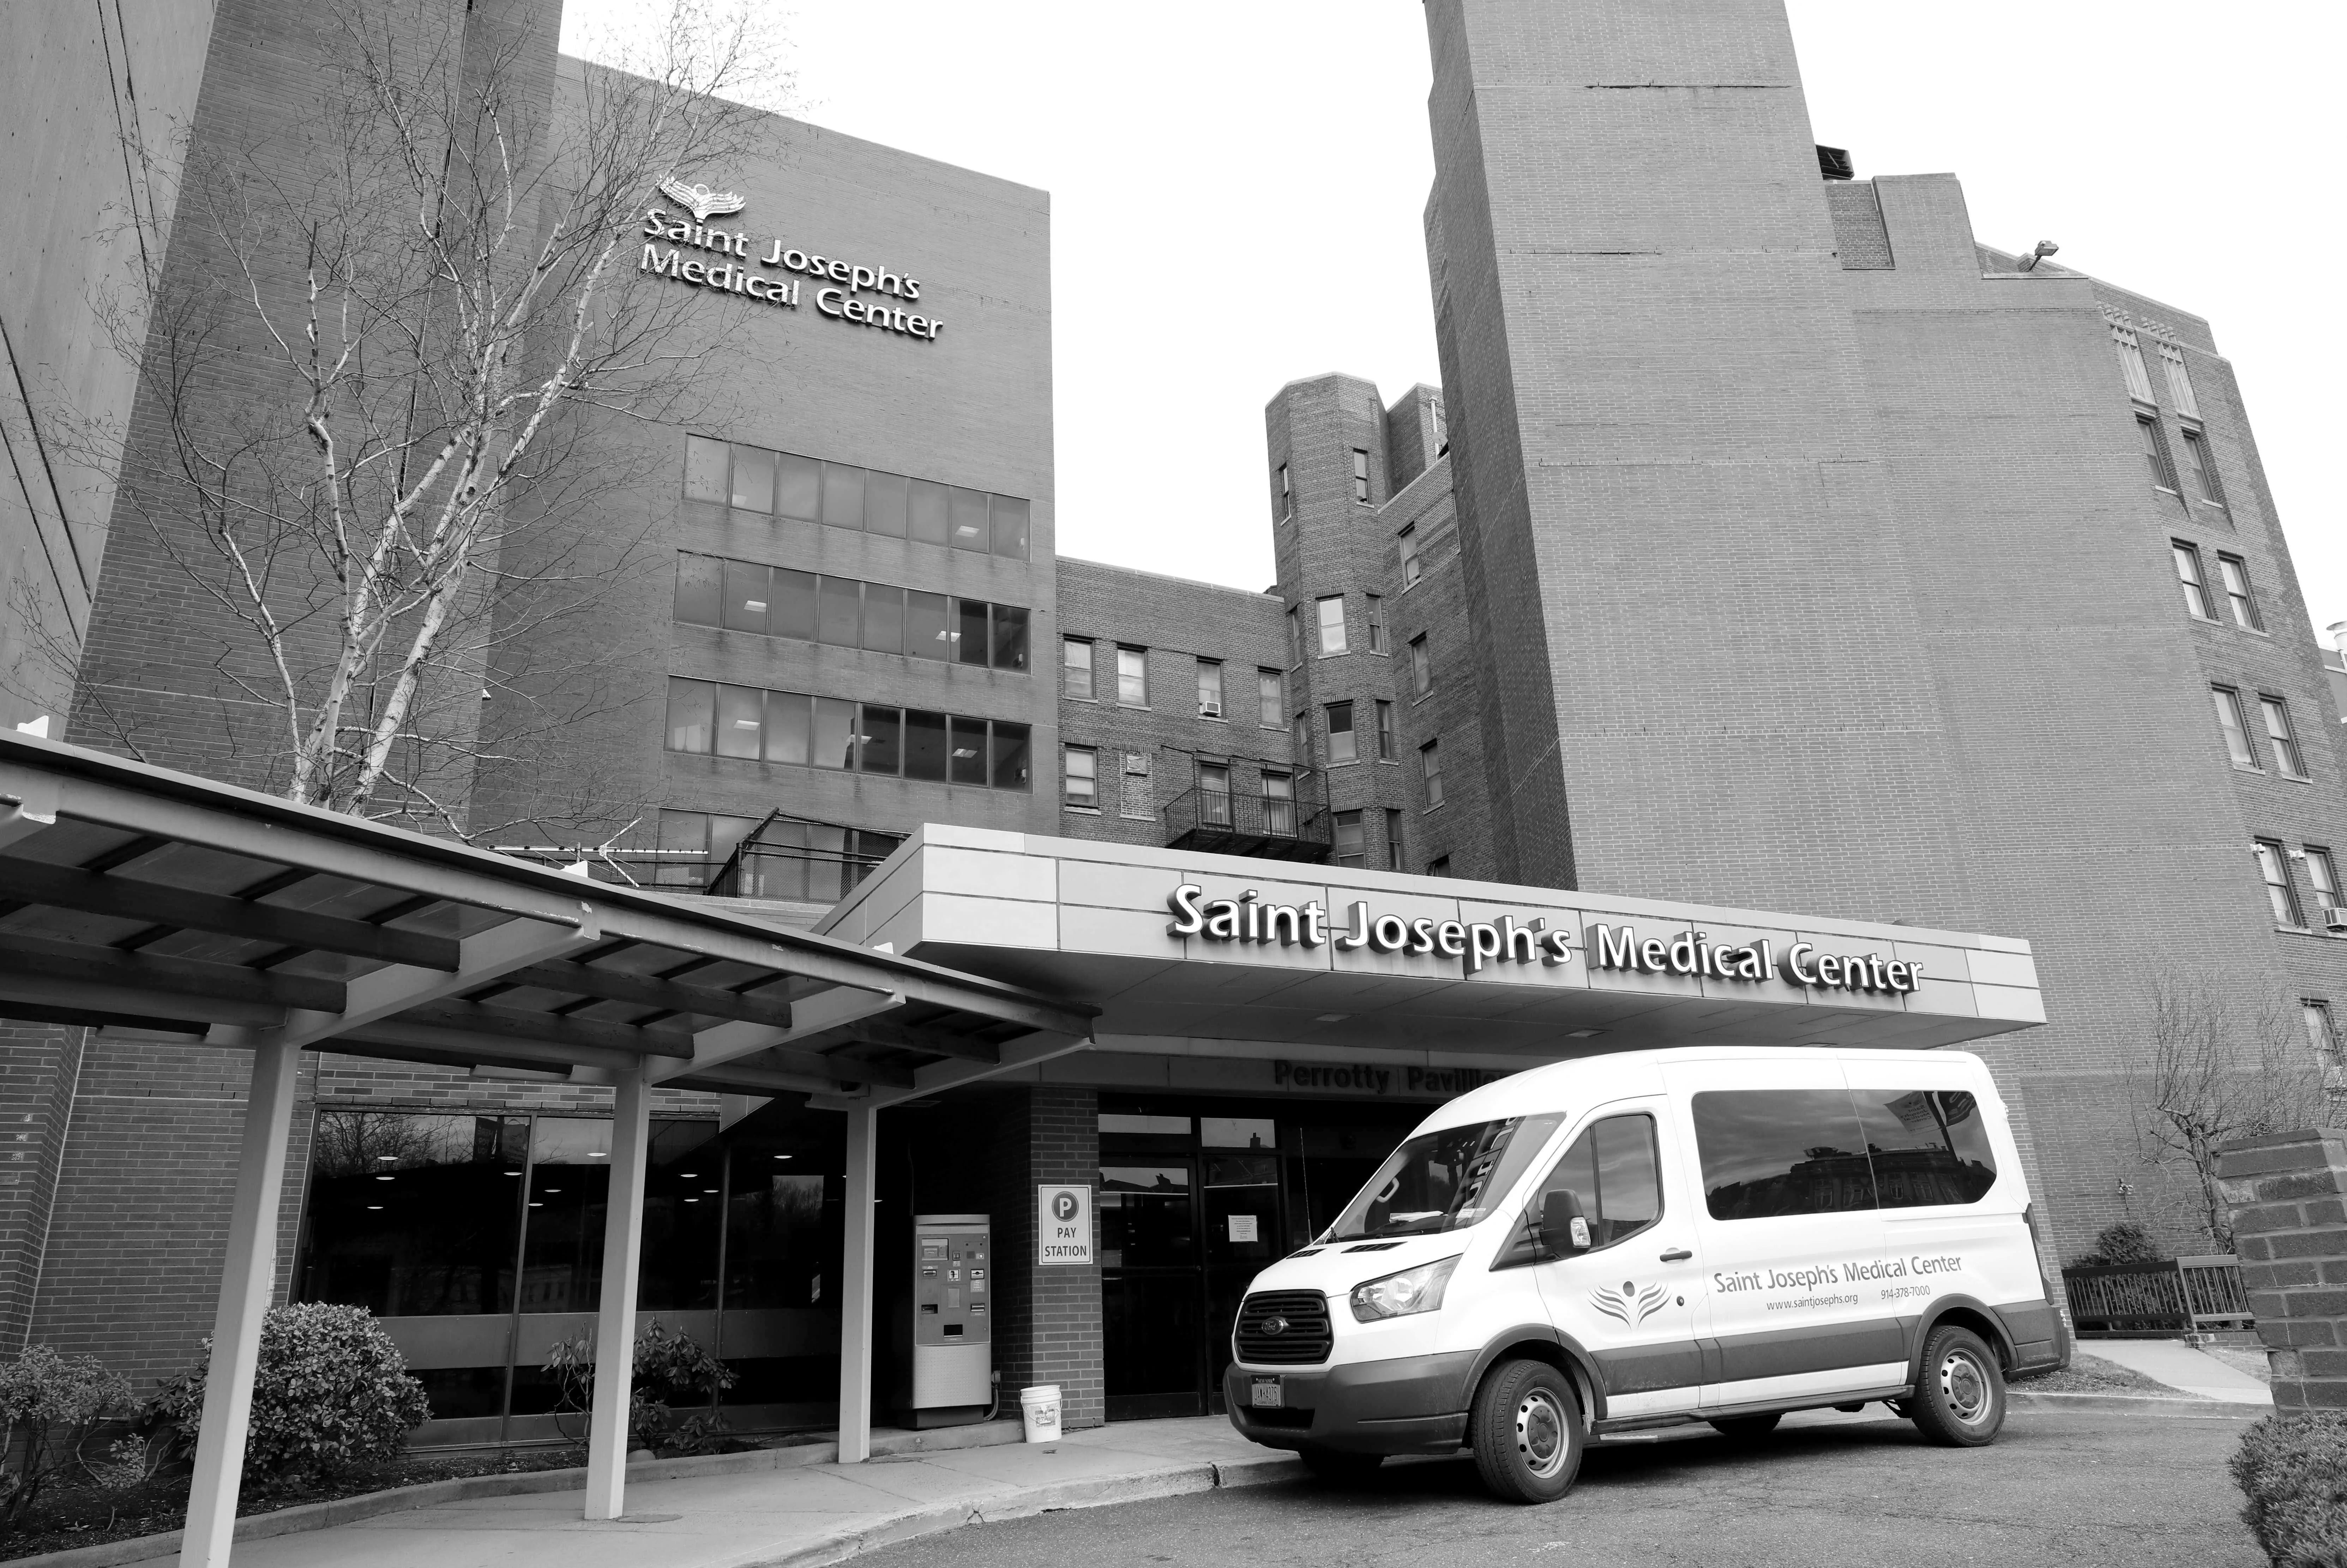 The exterior of Saint Joseph's Medical Center in Yonkers, photographed Feb. 24, 2022.